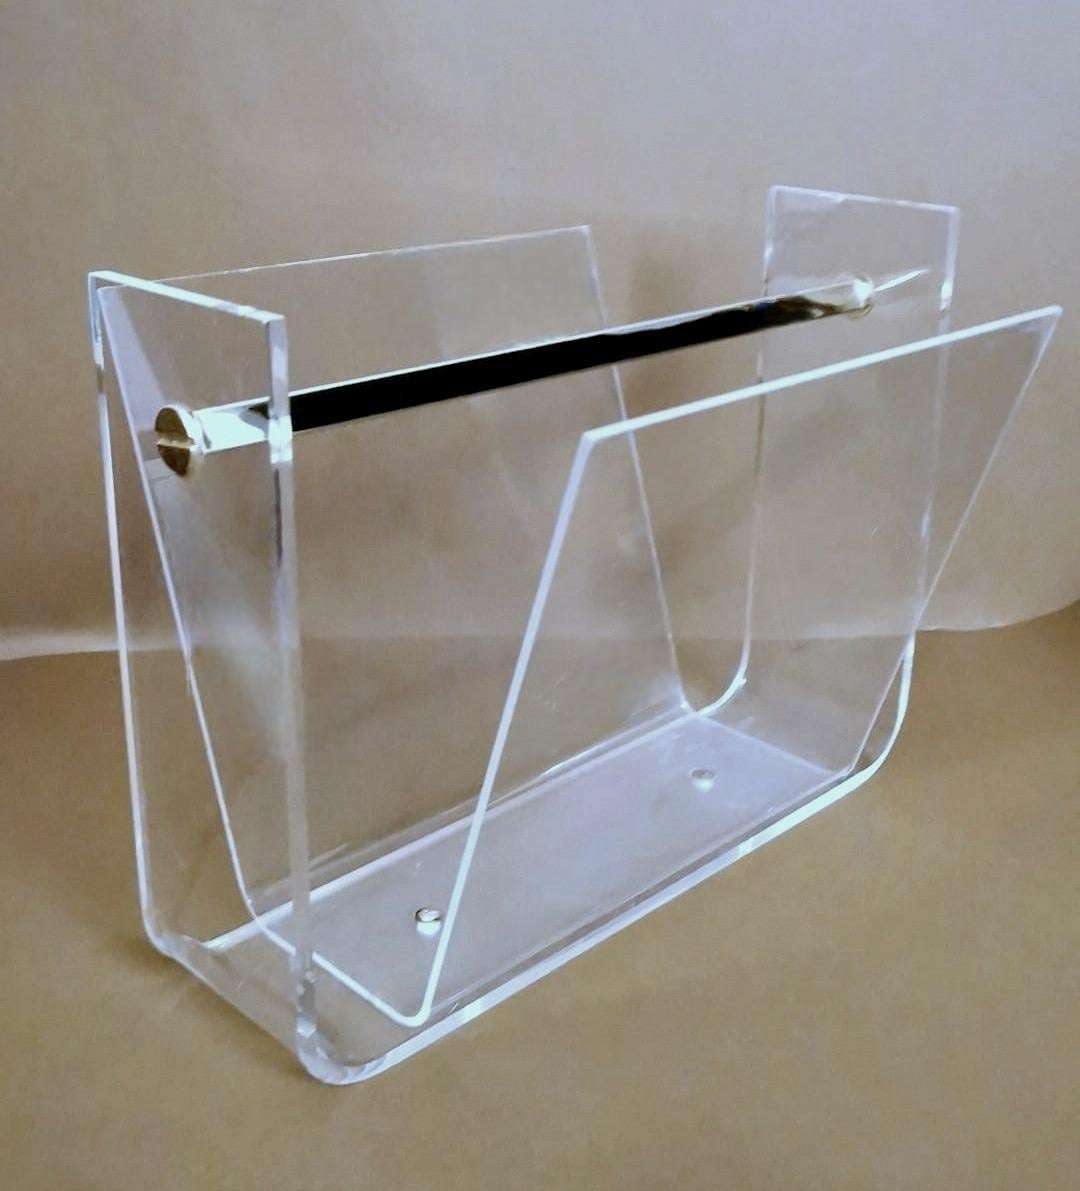 We kindly suggest you read the whole description, because with it we try to give you detailed technical and historical information to guarantee the authenticity of our objects.
Elegant and sophisticated magazine rack; it was made in Space Age style